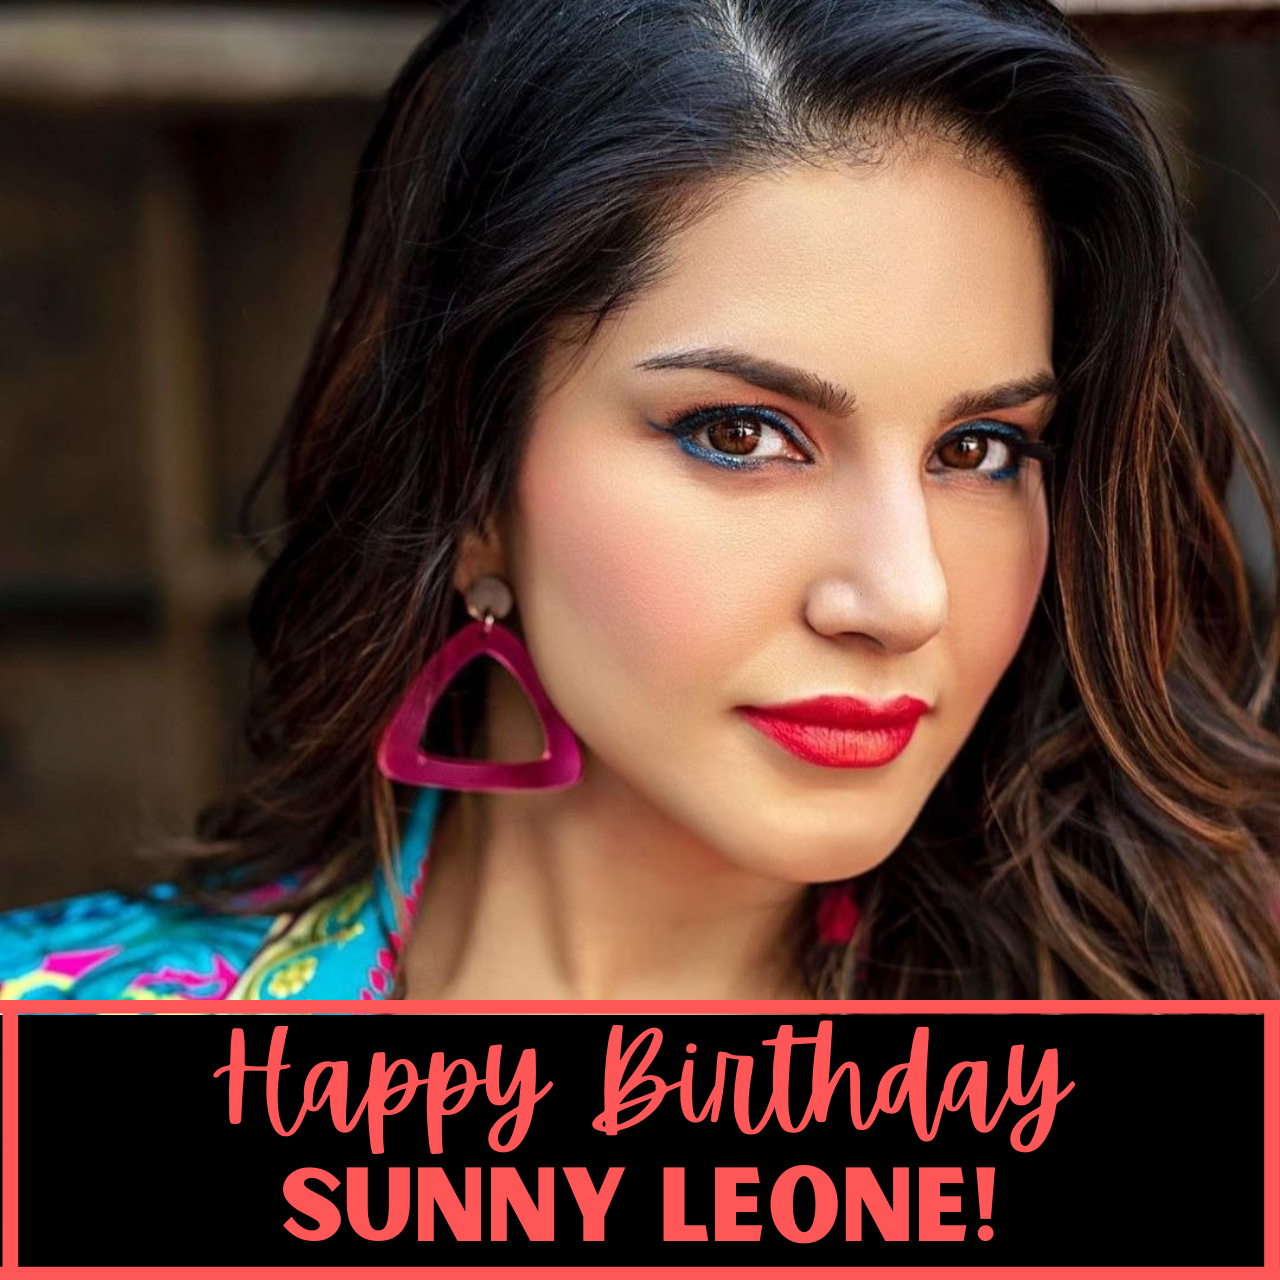 Happy Birthday Sunny Leone Song, Quotes, Wishes, and photos to share with your favorite actress